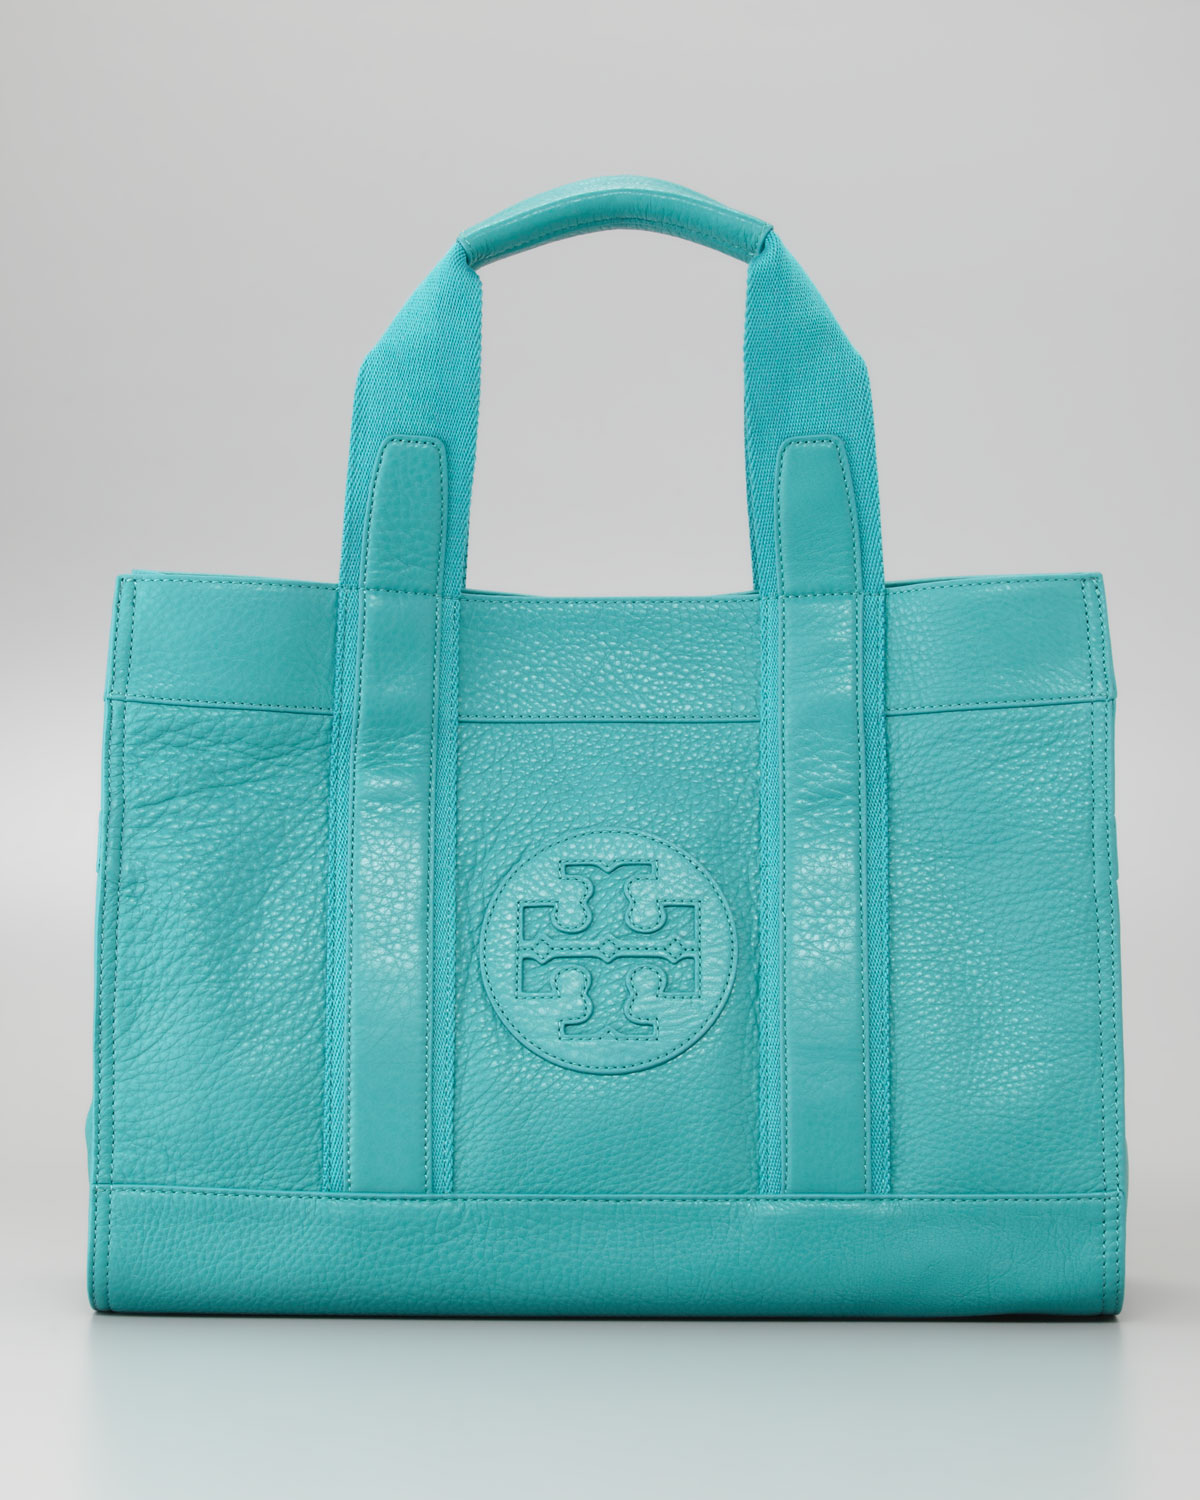 Tory Burch Classic Tory Tote Bag in Green (turquoise) | Lyst